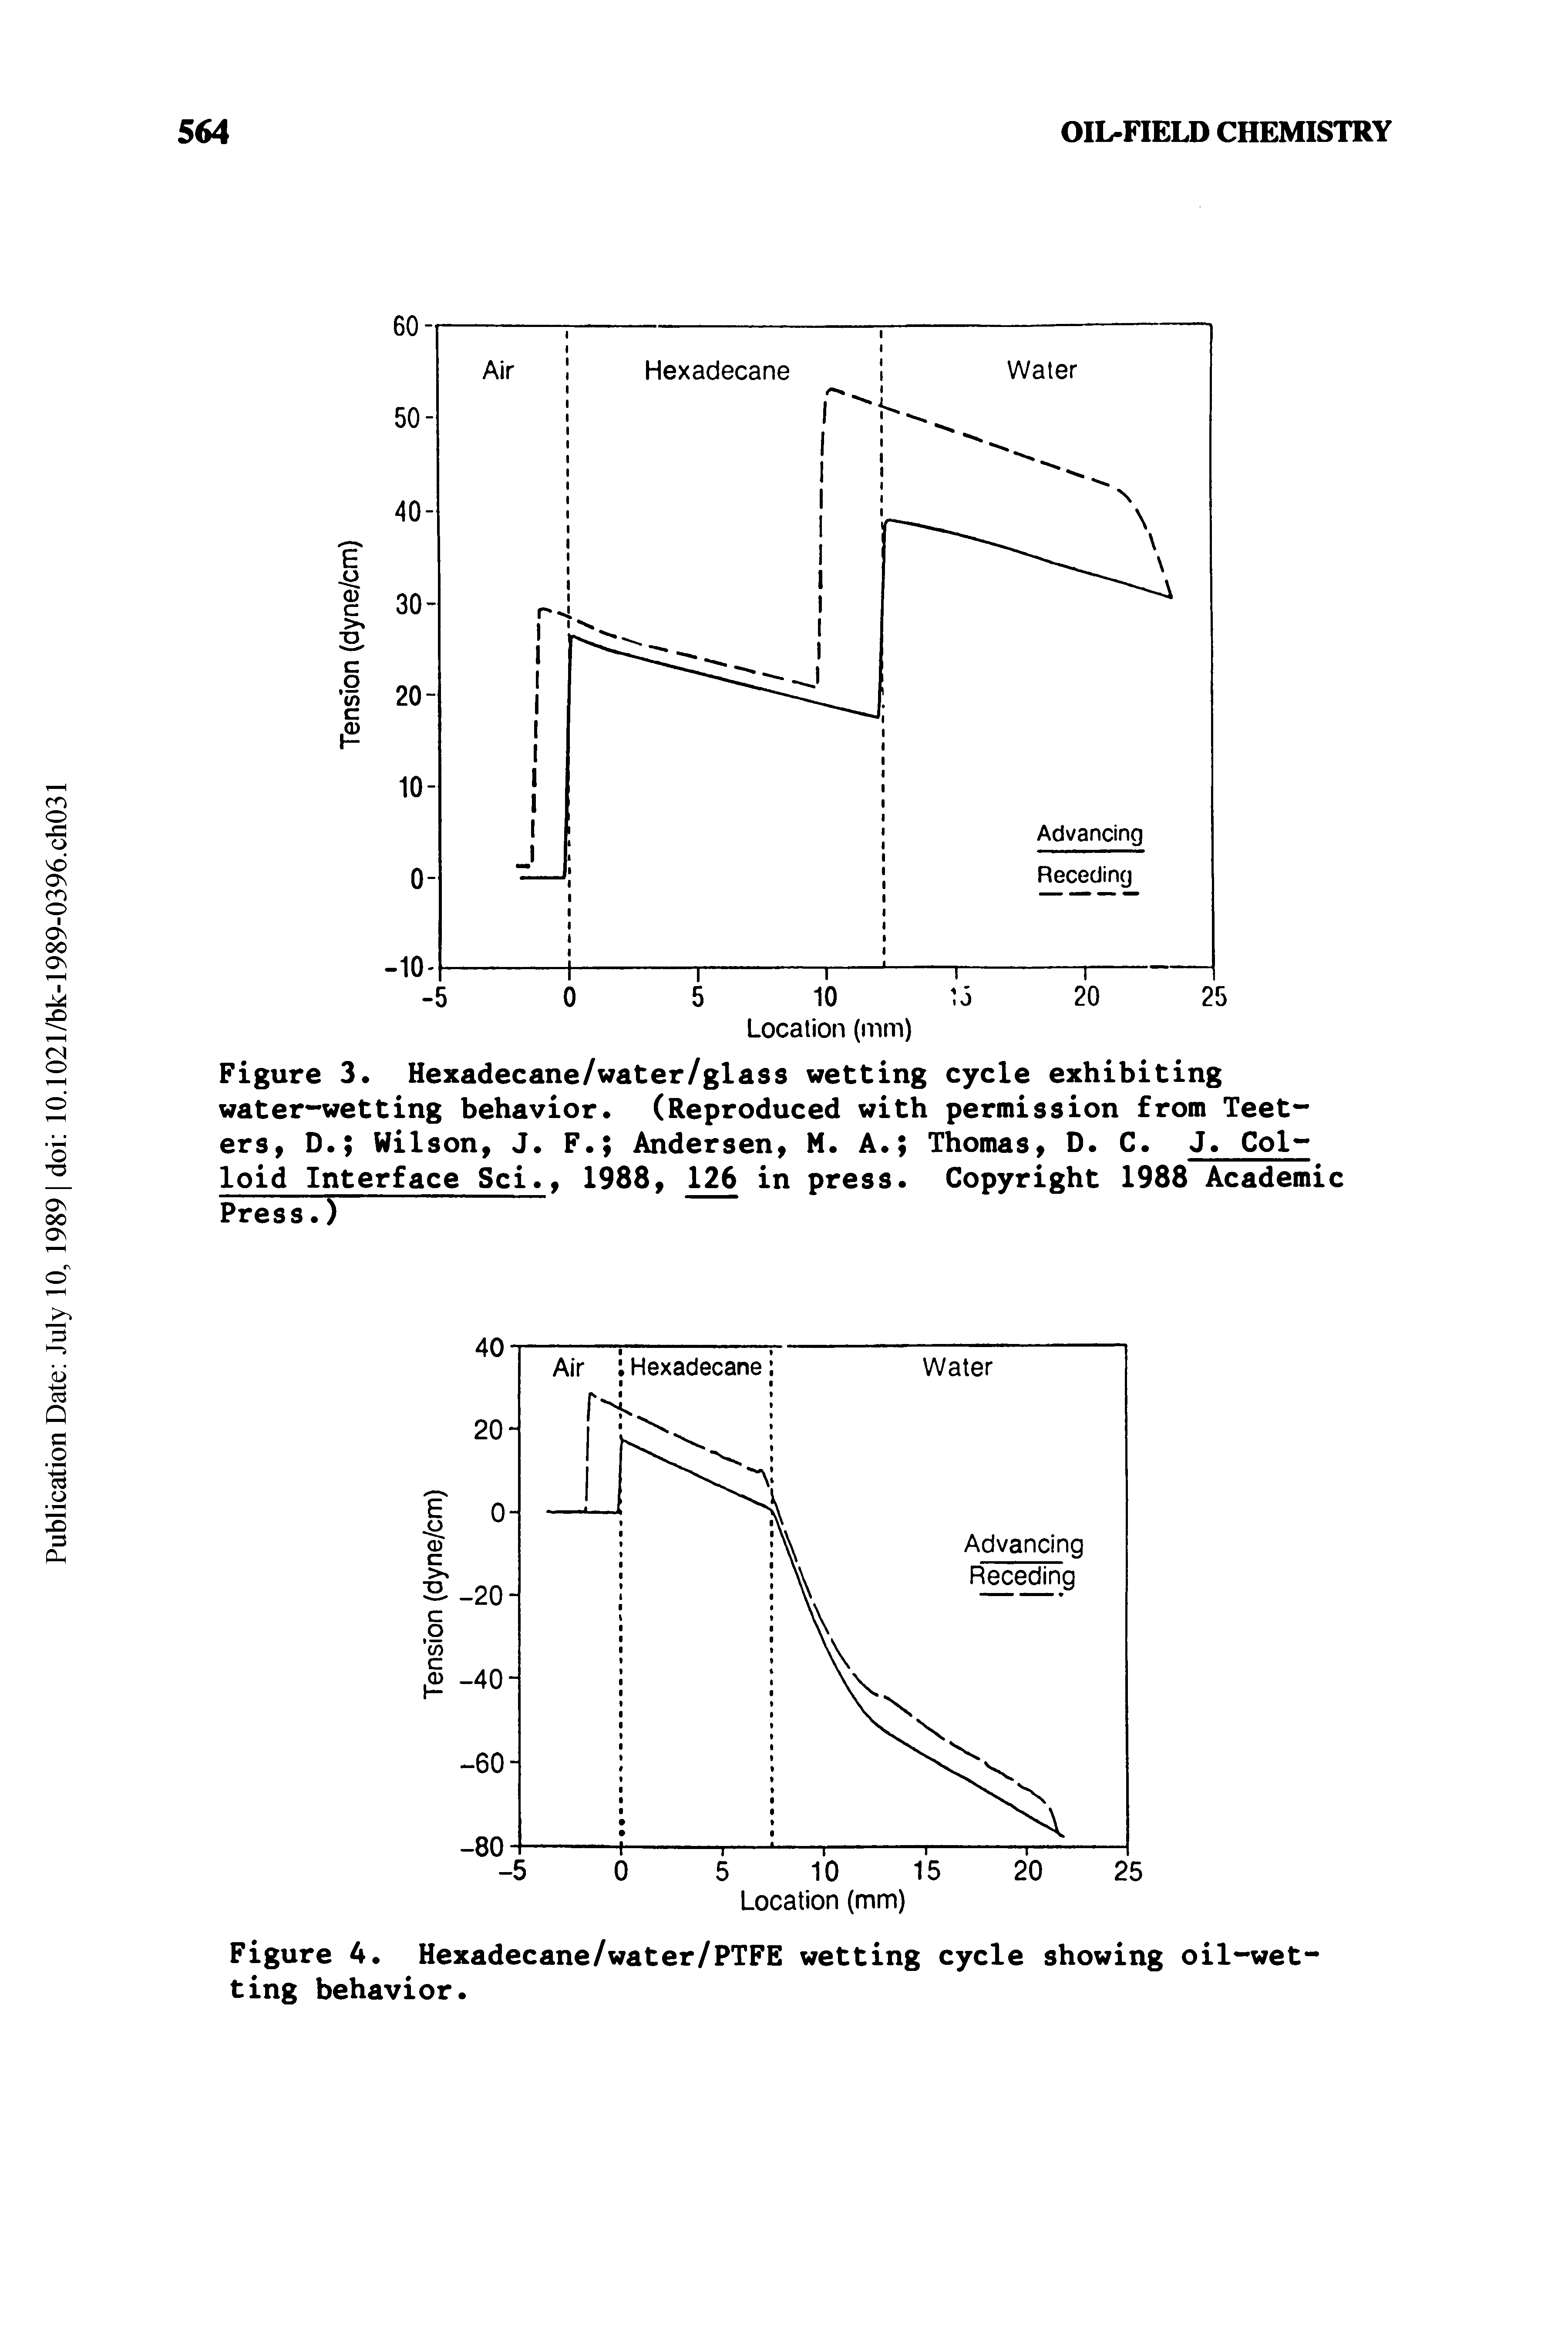 Figure 3. Hexadecane/water/glass wetting cycle exhibiting water-wetting behavior. (Reproduced with permission from Teeters, D. Wilson, J. F. Andersen, M. A. Thomas, D. C. J. Colloid Interface Sci., 1988, 126 in press. Copyright 1988 Academic Press.)...